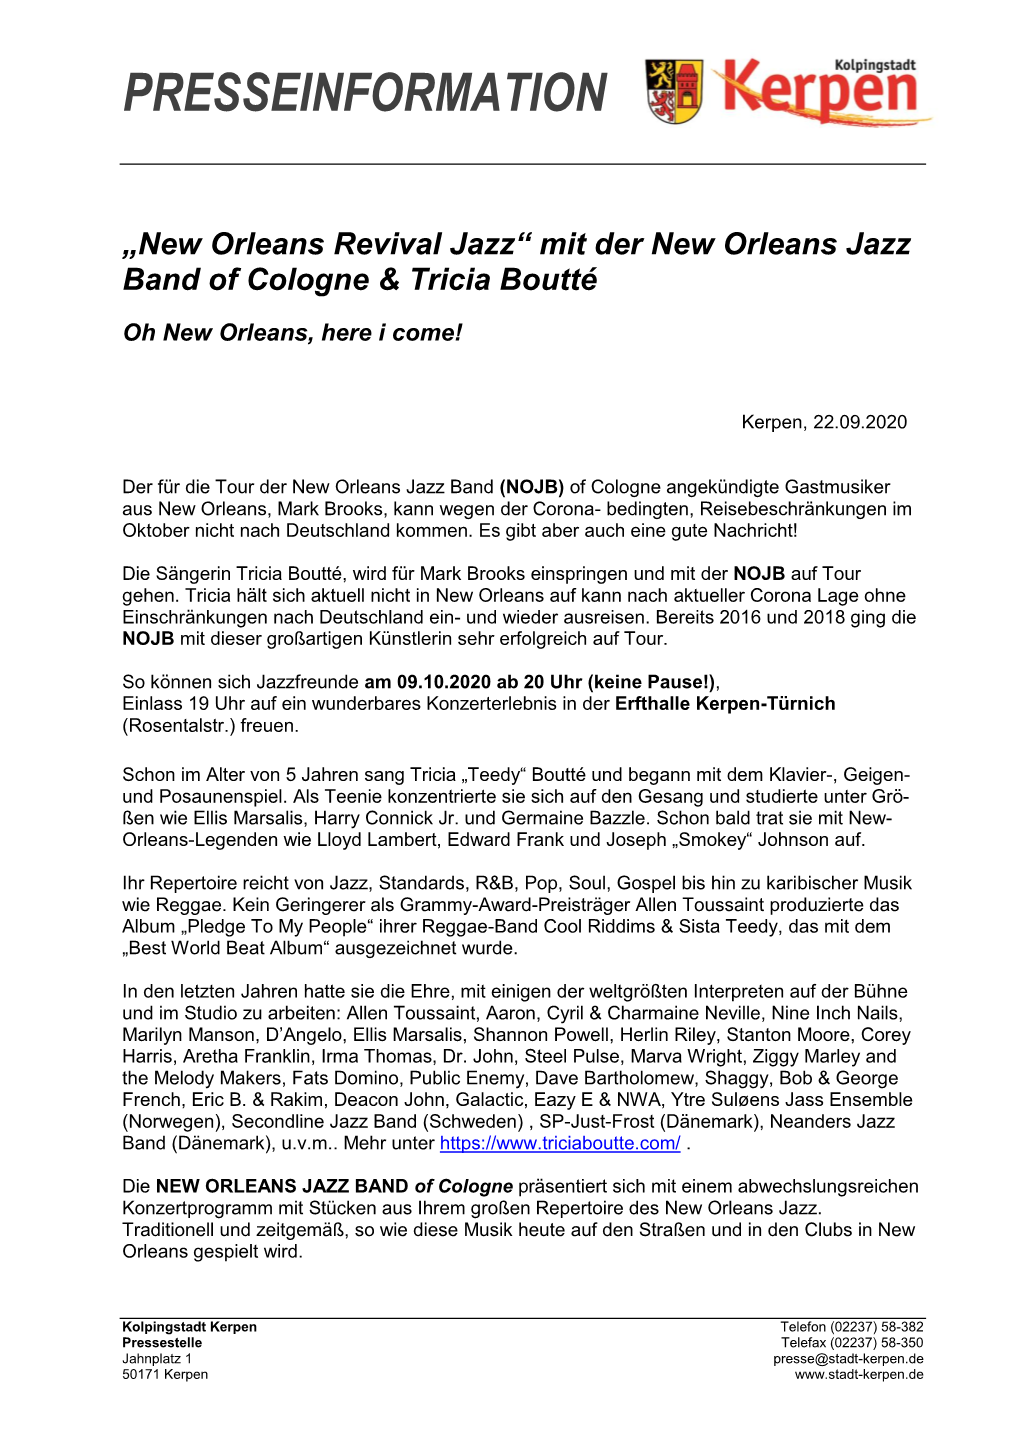 New Orleans Revival Jazz“ Mit Der New Orleans Jazz Band of Cologne & Tricia Boutté